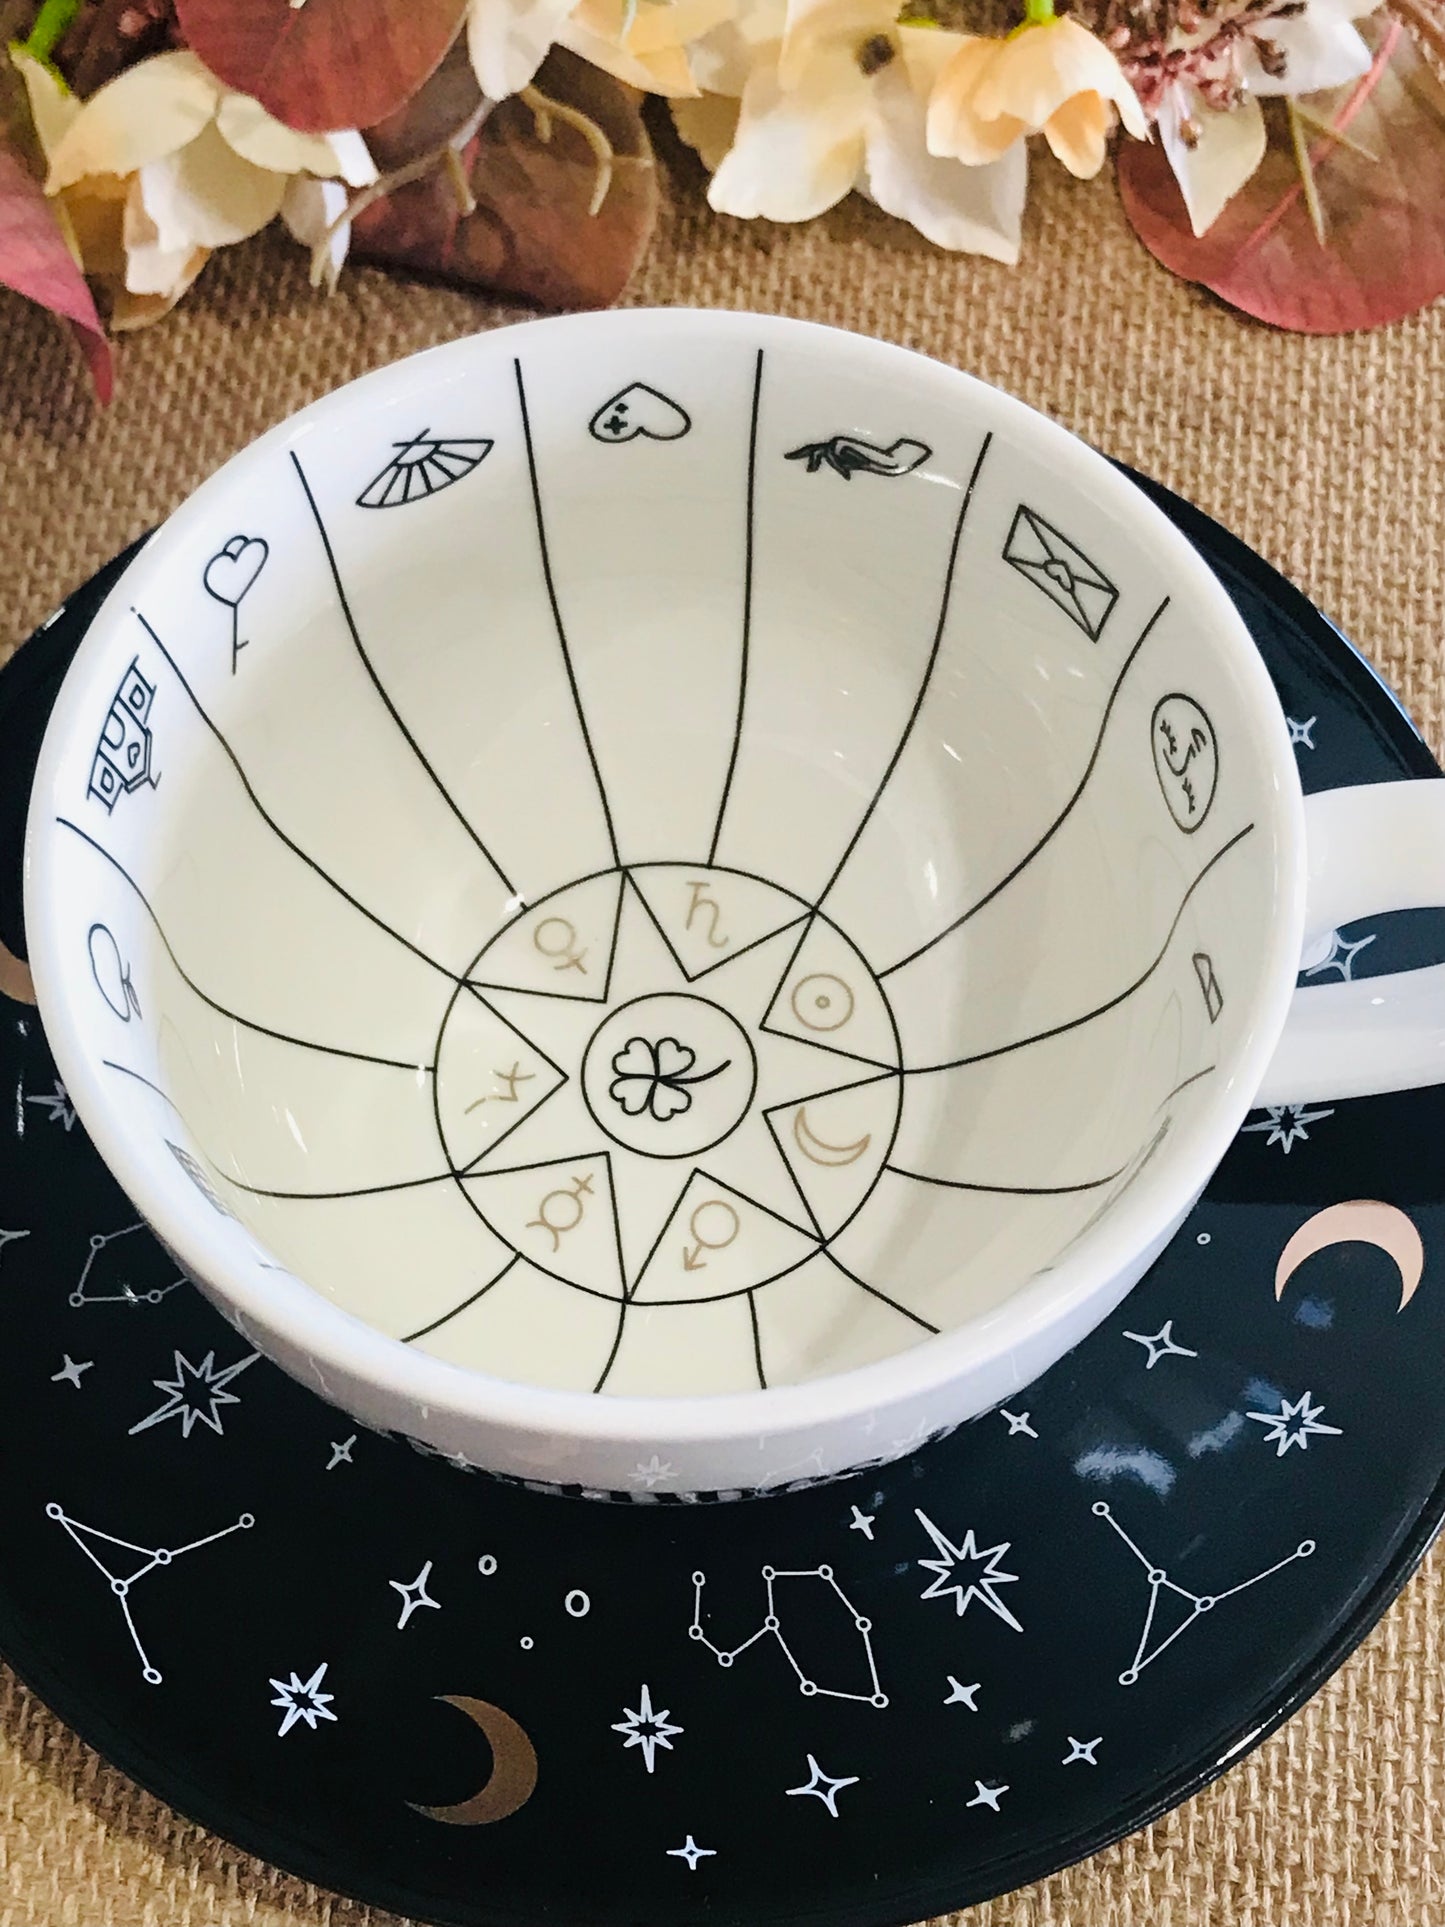 Tea Cup & Saucer ~ Mysterious things I see when telling fortunes in tea